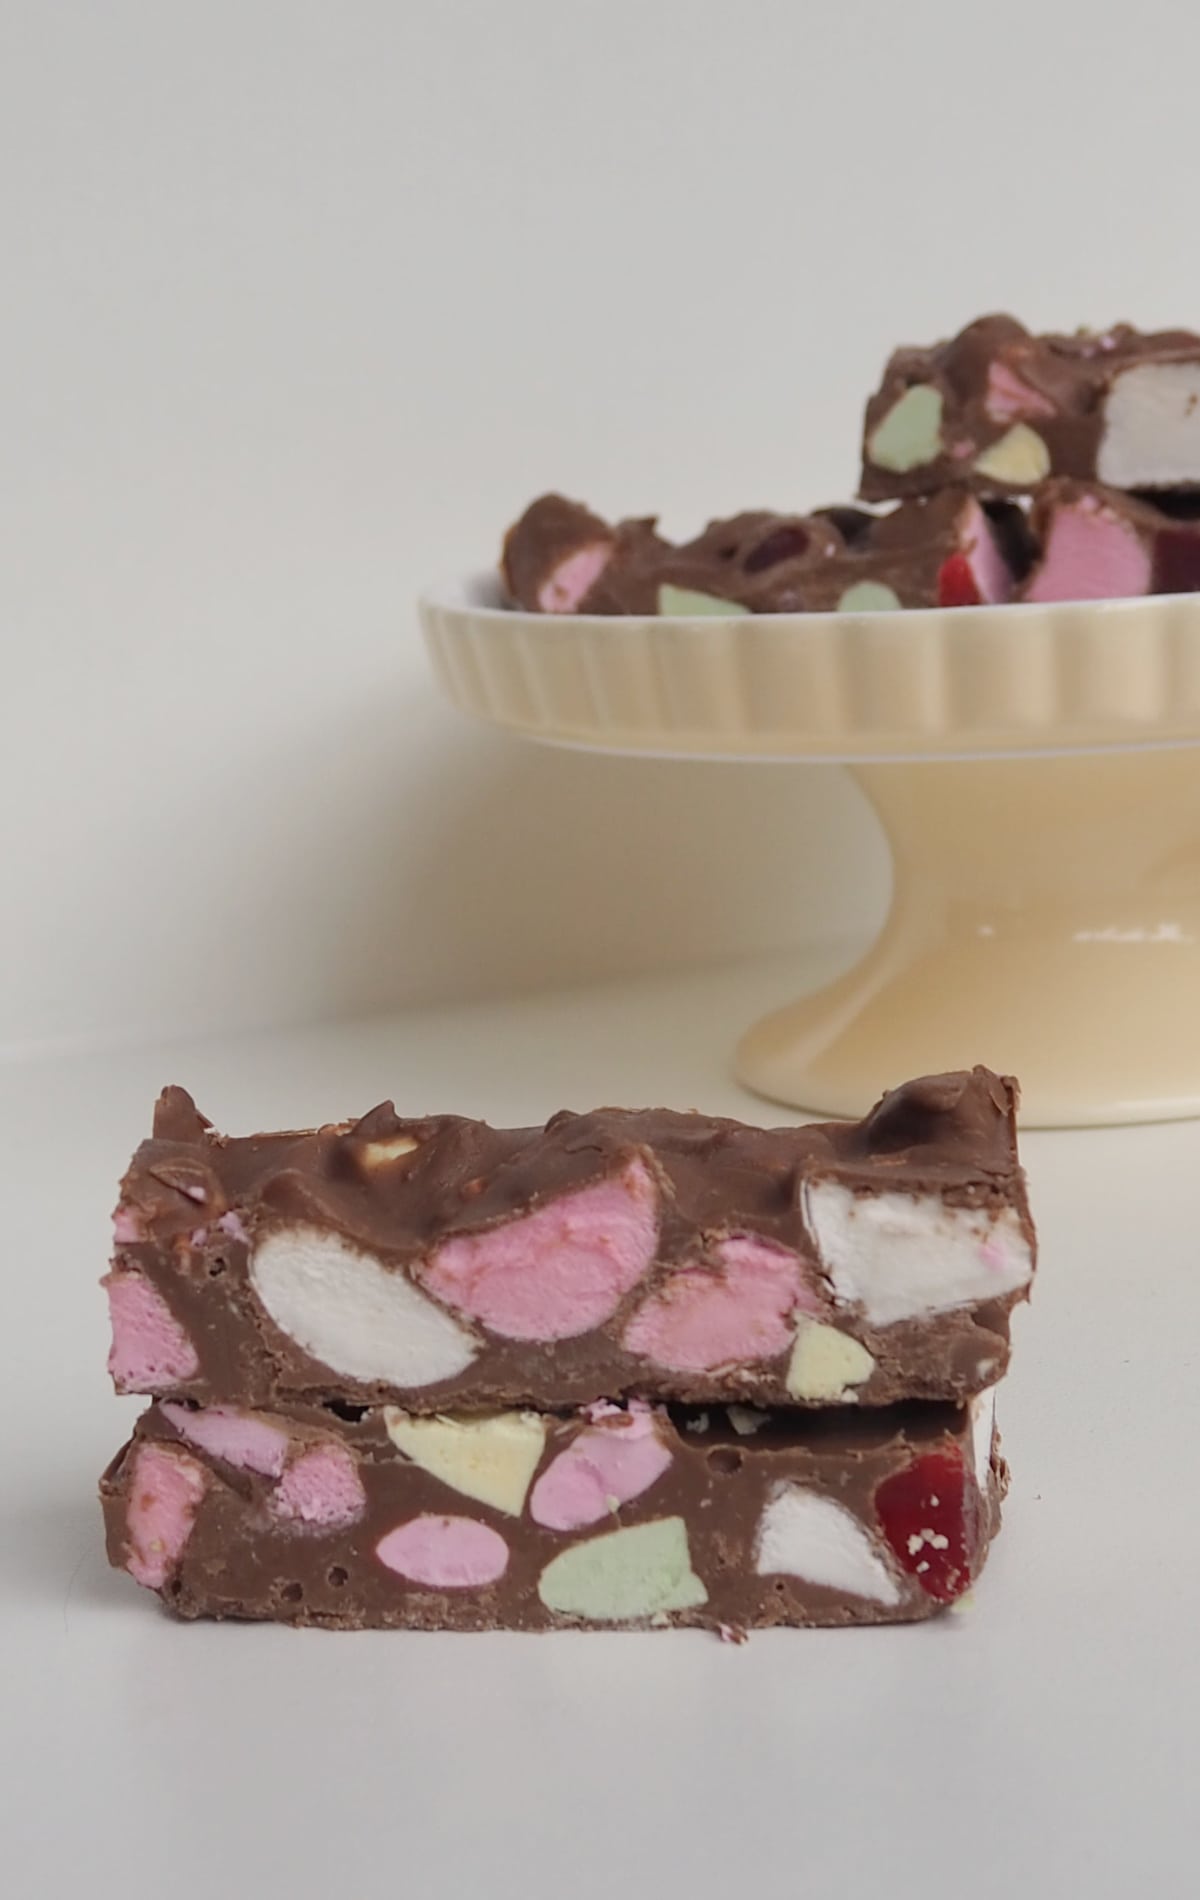 Two pieces of Clinkers Rocky Road stacked on top of each other. In the background is a cream cake stand with more pieces of rocky road on it.